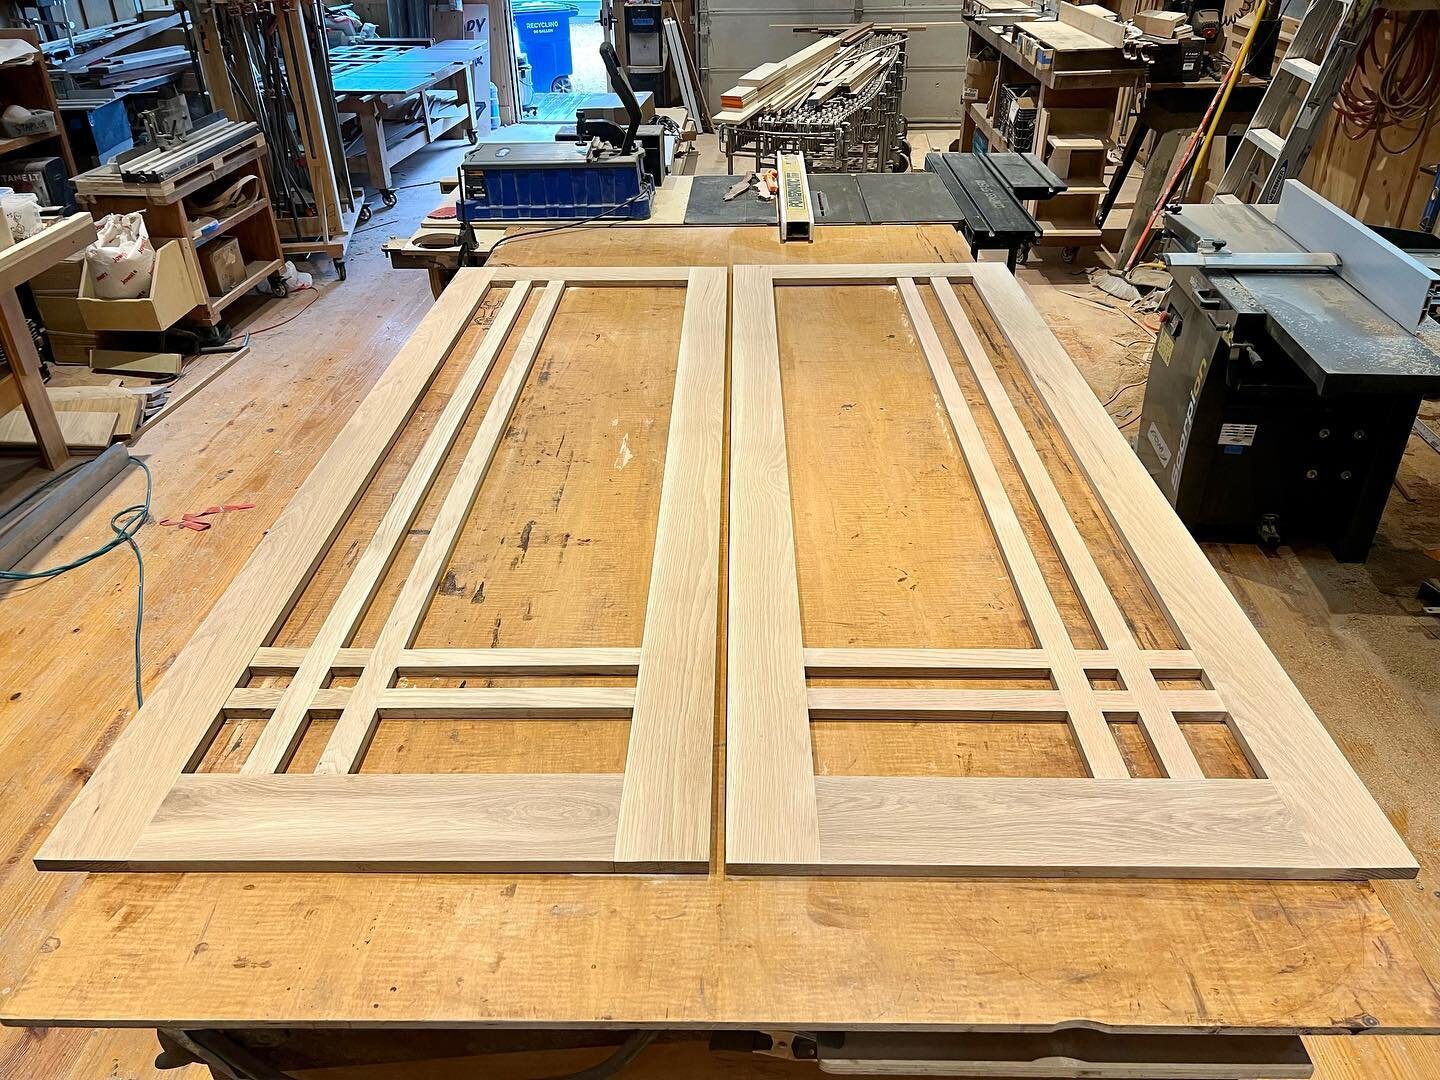 Peep progress on these white oak hardwood screen doors with craftsman windowpane detail. Will be paired with a poplar backer containing a recessed channel to create the prettiest screen doors you&rsquo;ve ever seen!!

#screendoor #porchlife #porch #w